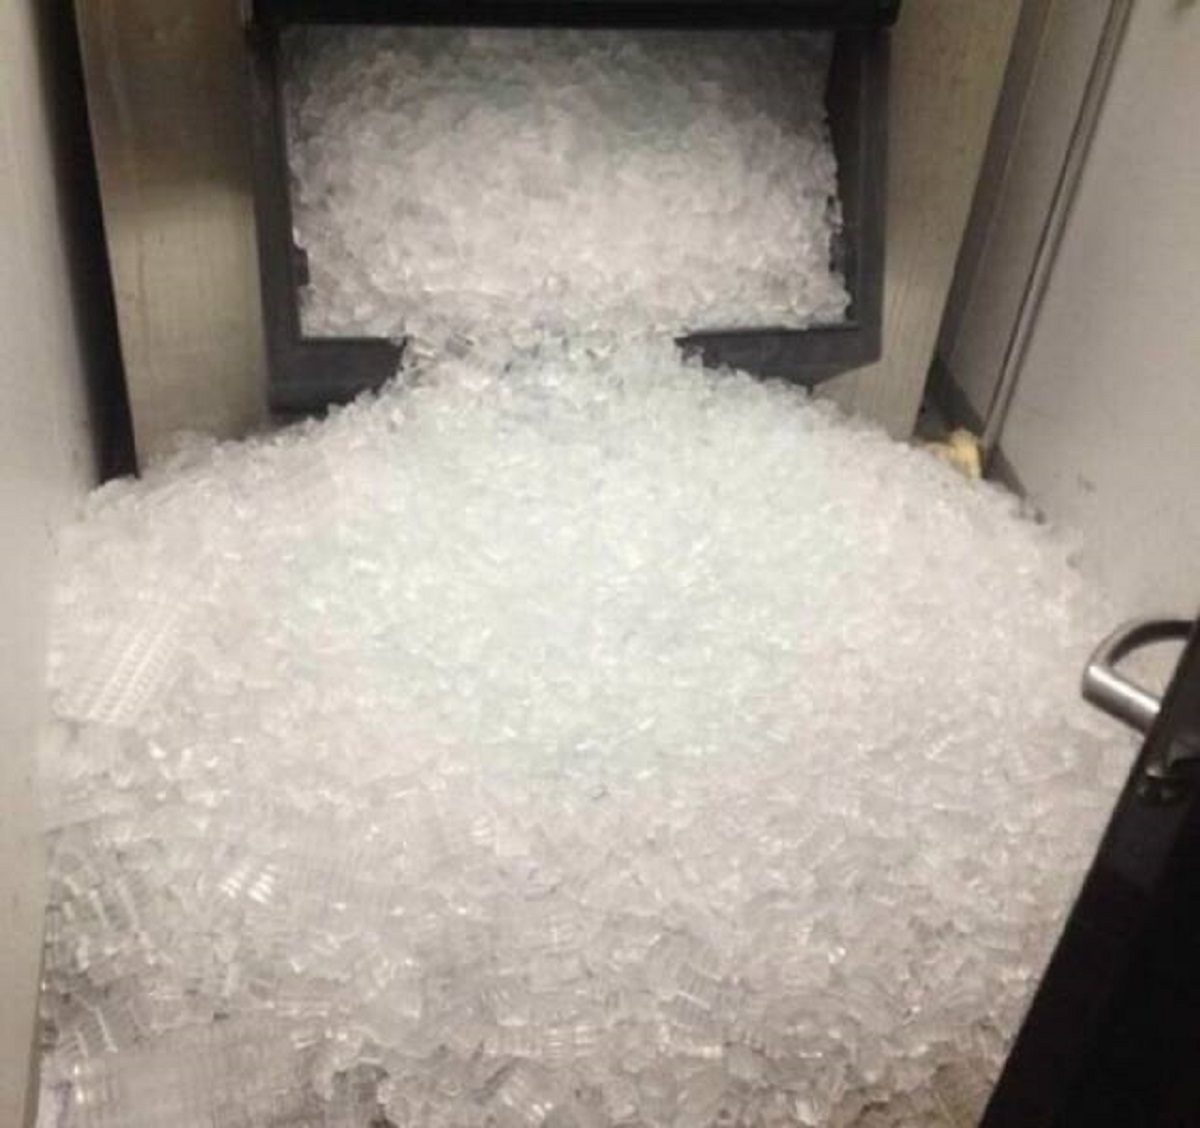 "Coming Into Work To Discover That Someone Left The Ice Machine's Door Open Overnight"